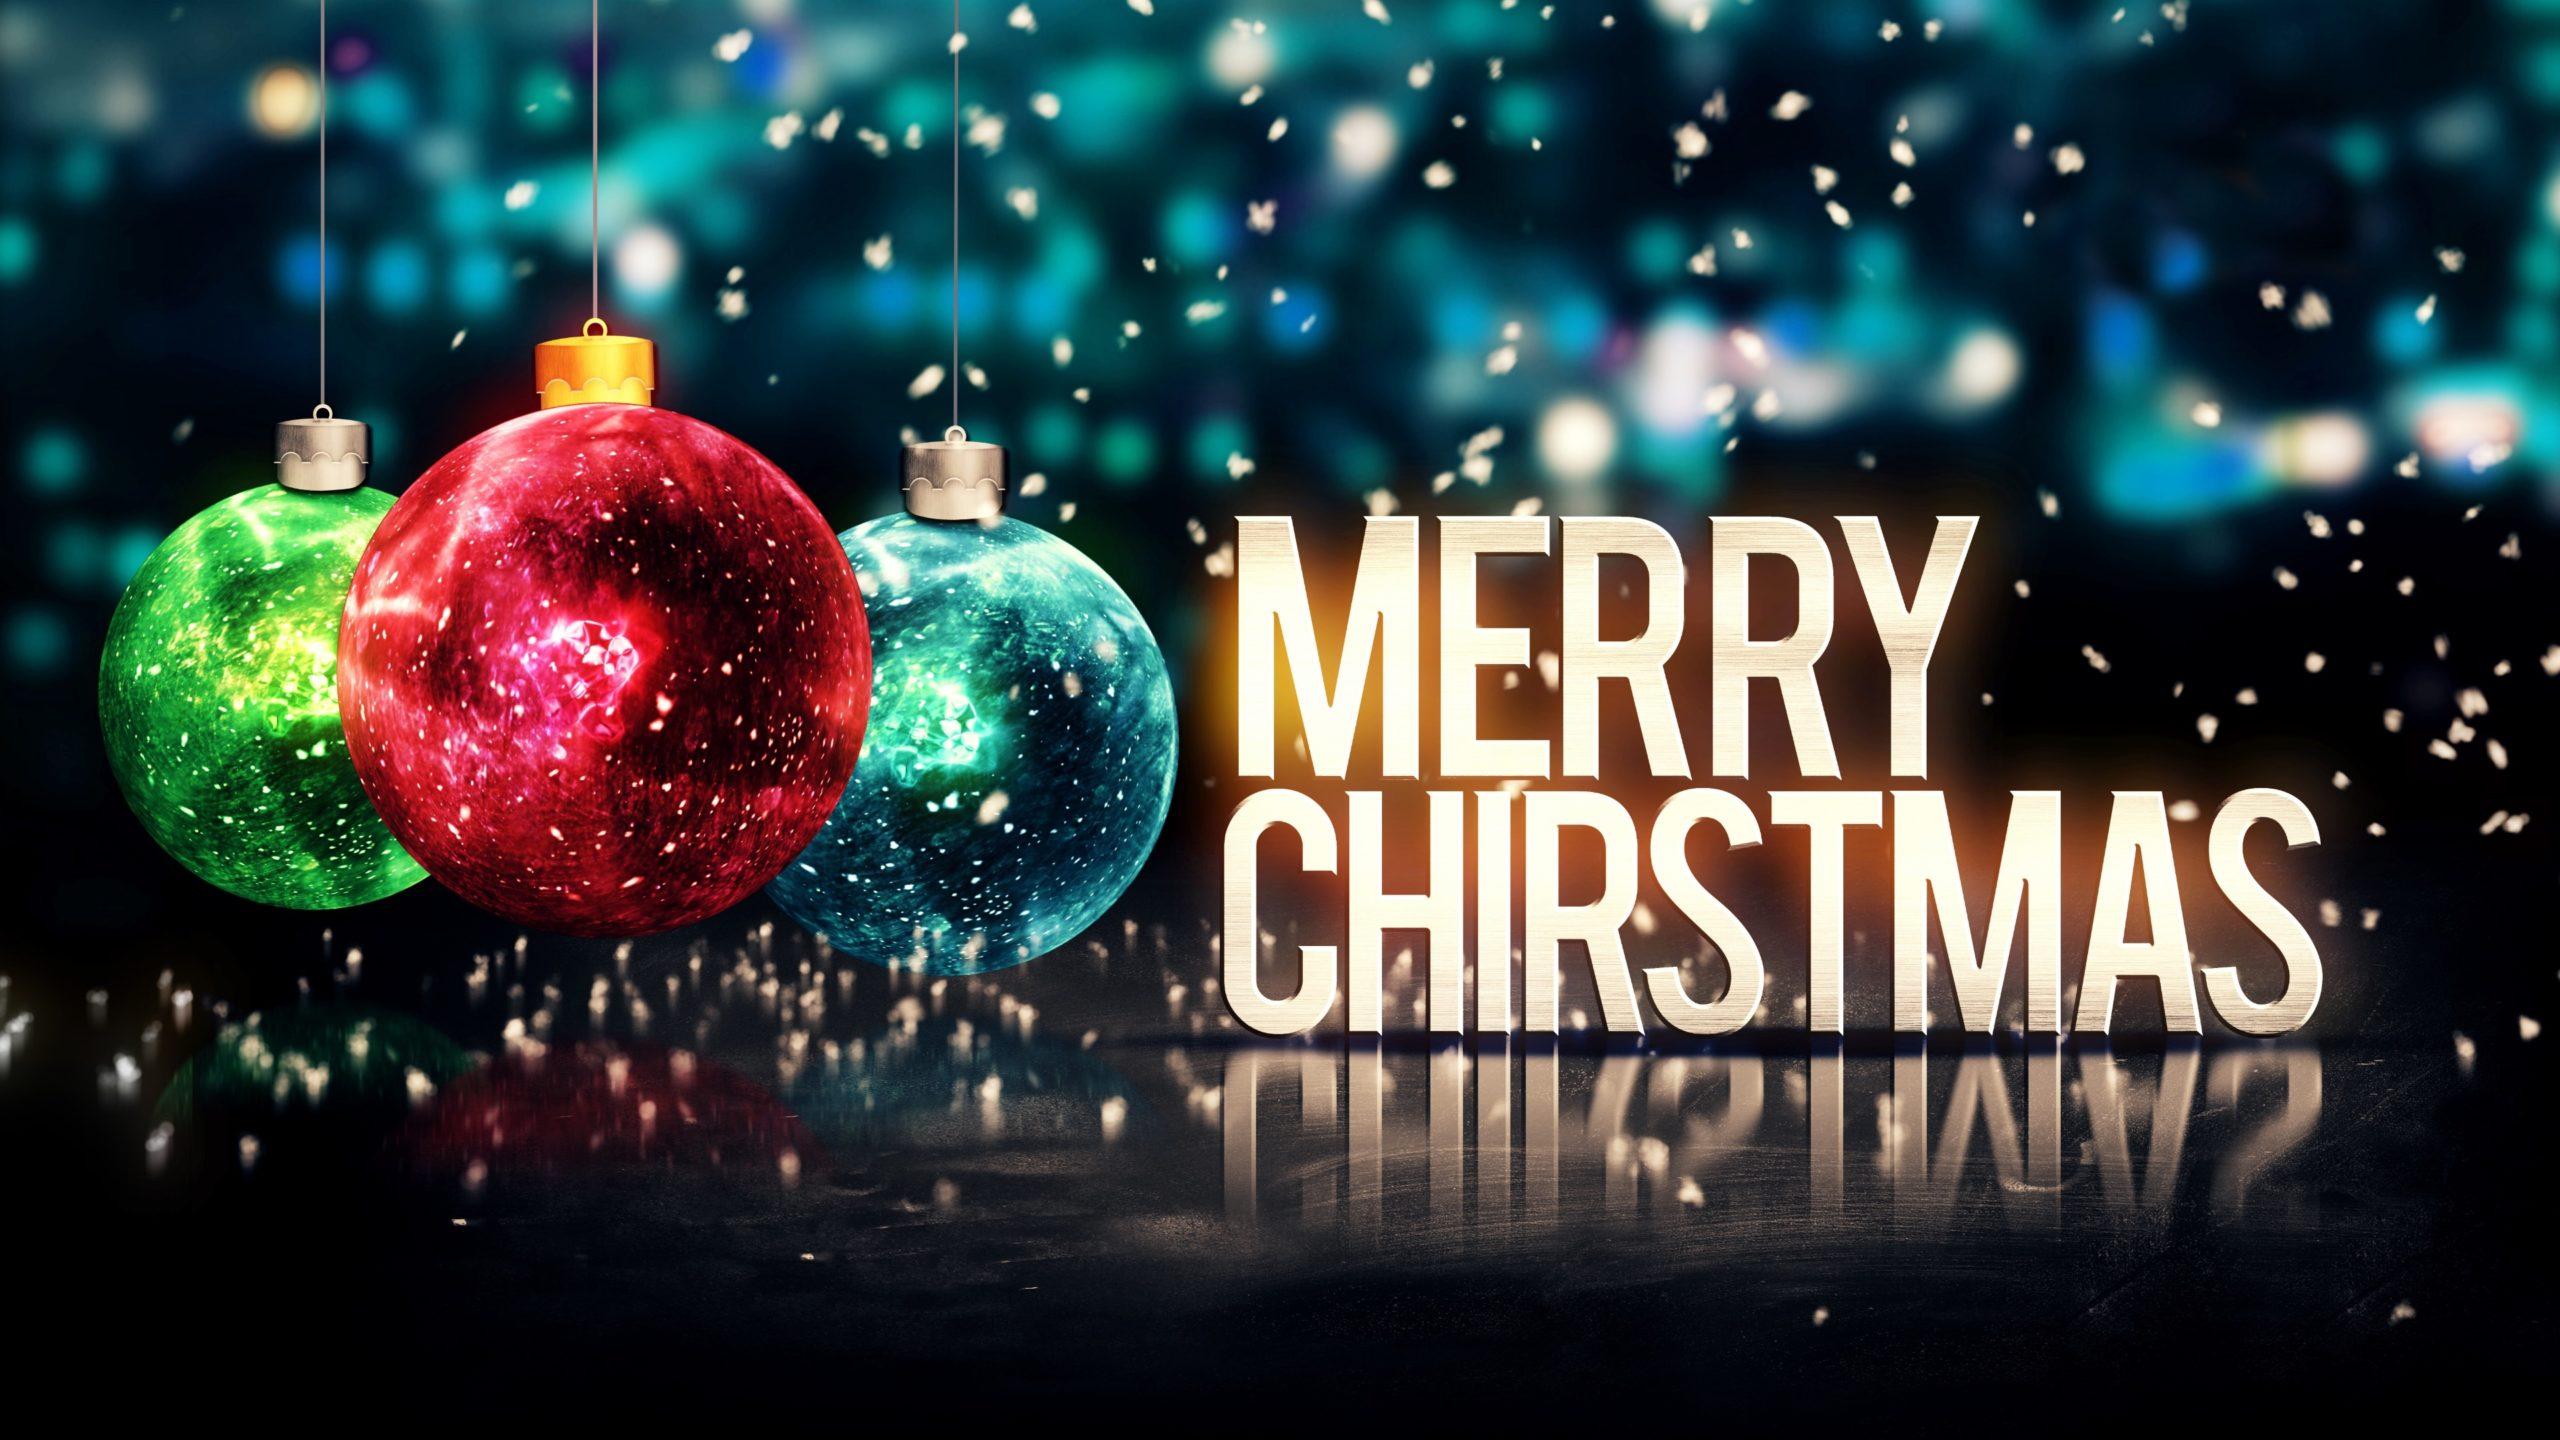 Merry Christmas 2019 -Greetings, Quotes, Whats App Messages, HD